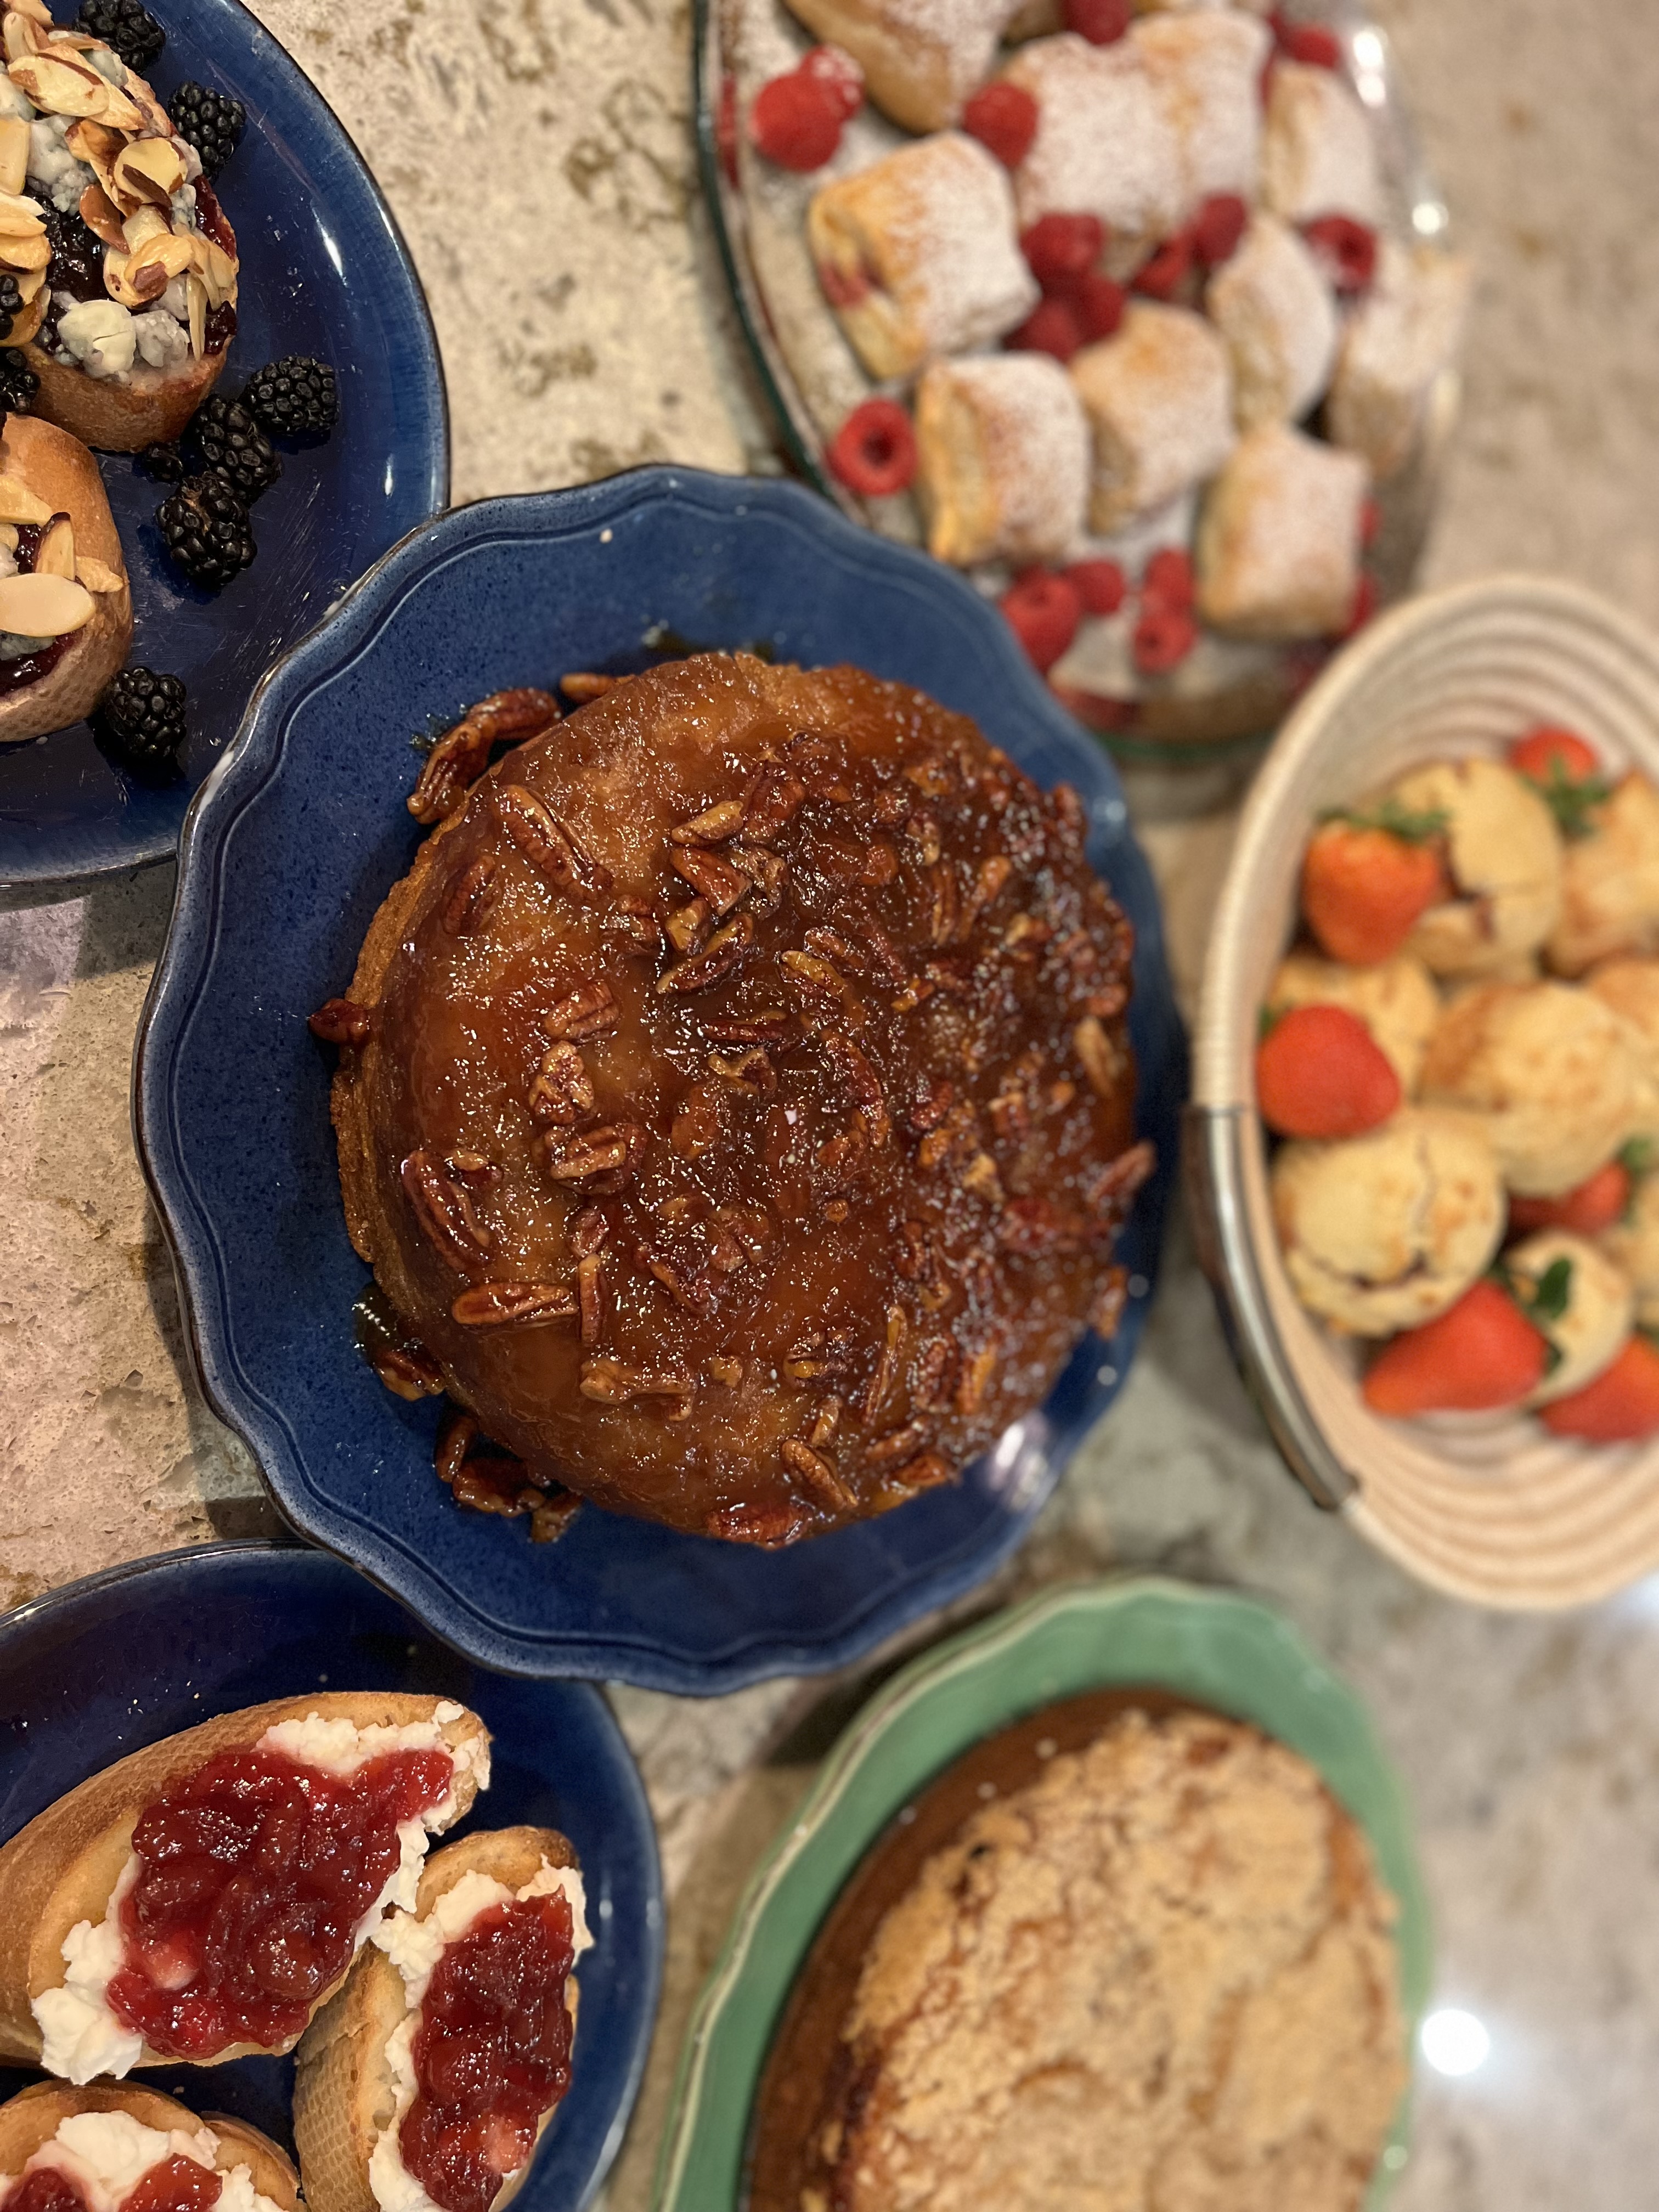 New Canaan Farms Peach Amaretto & Pecan Cake surrounded by other jam-based treats